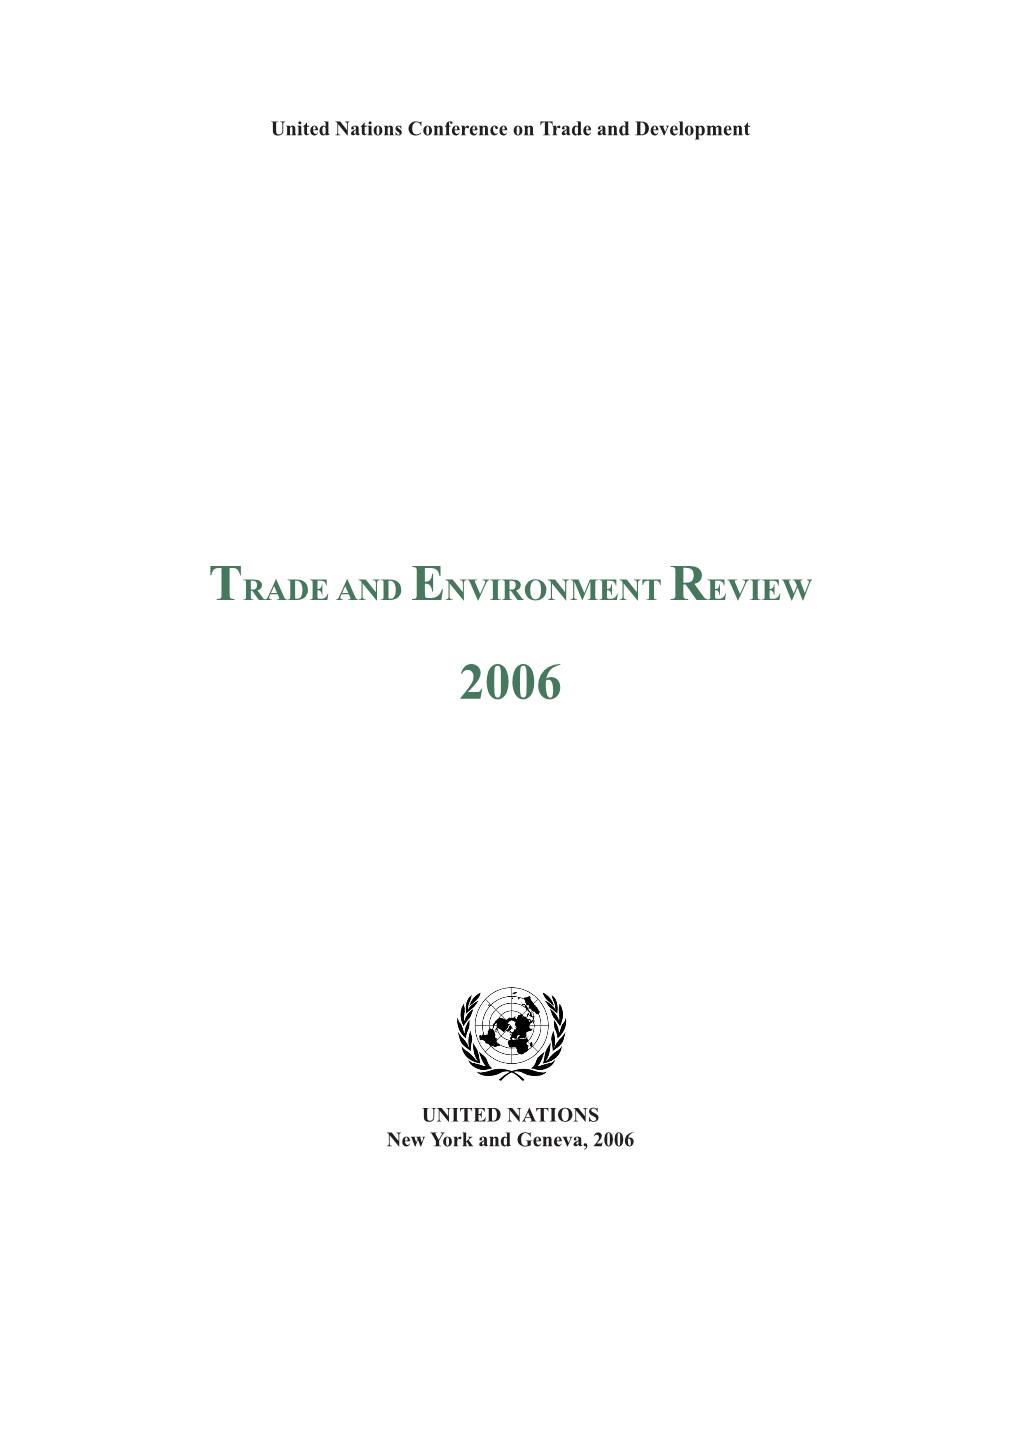 Trade and Environment Review 2006